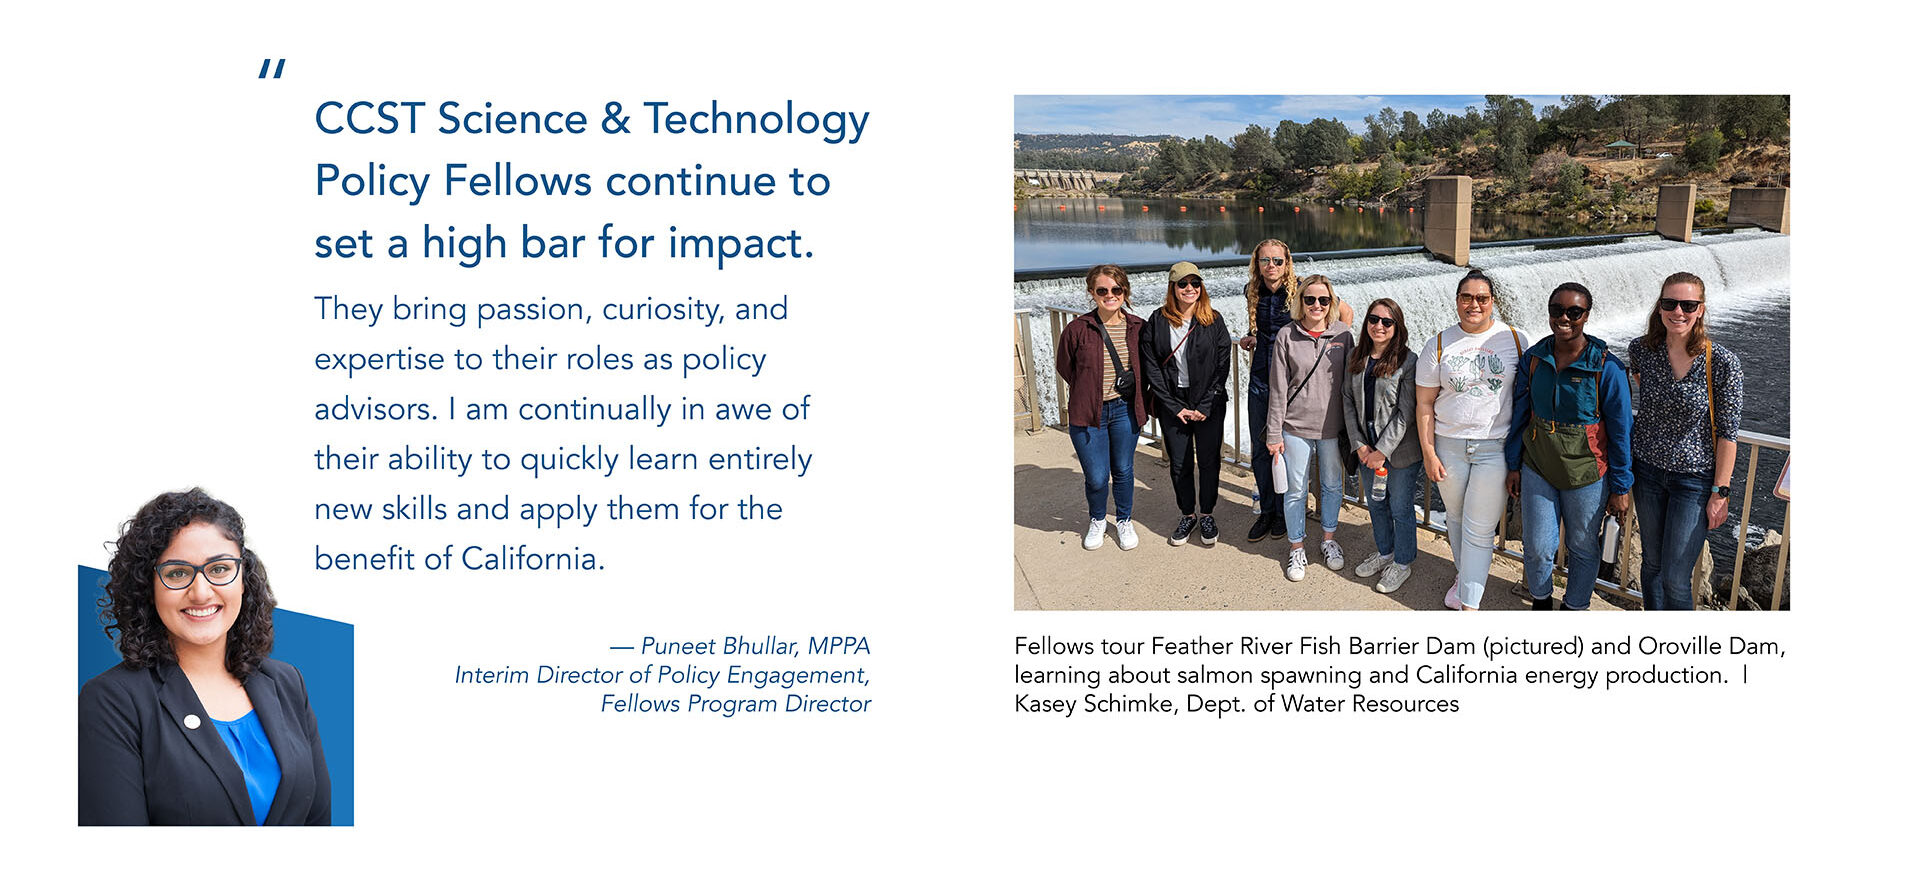 A graphic with a quote and image from Puneet Bhullar on the left and a group photo of the Fellows on the right during a water and energy tour: "CCST Science & Technology Policy Fellows continue to set a high bar for impact. They bring passion, curiosity, and expertise to their roles as policy advisors. I am continually in awe of their ability to quickly learn entirely new skills and apply them for the benefit of California."